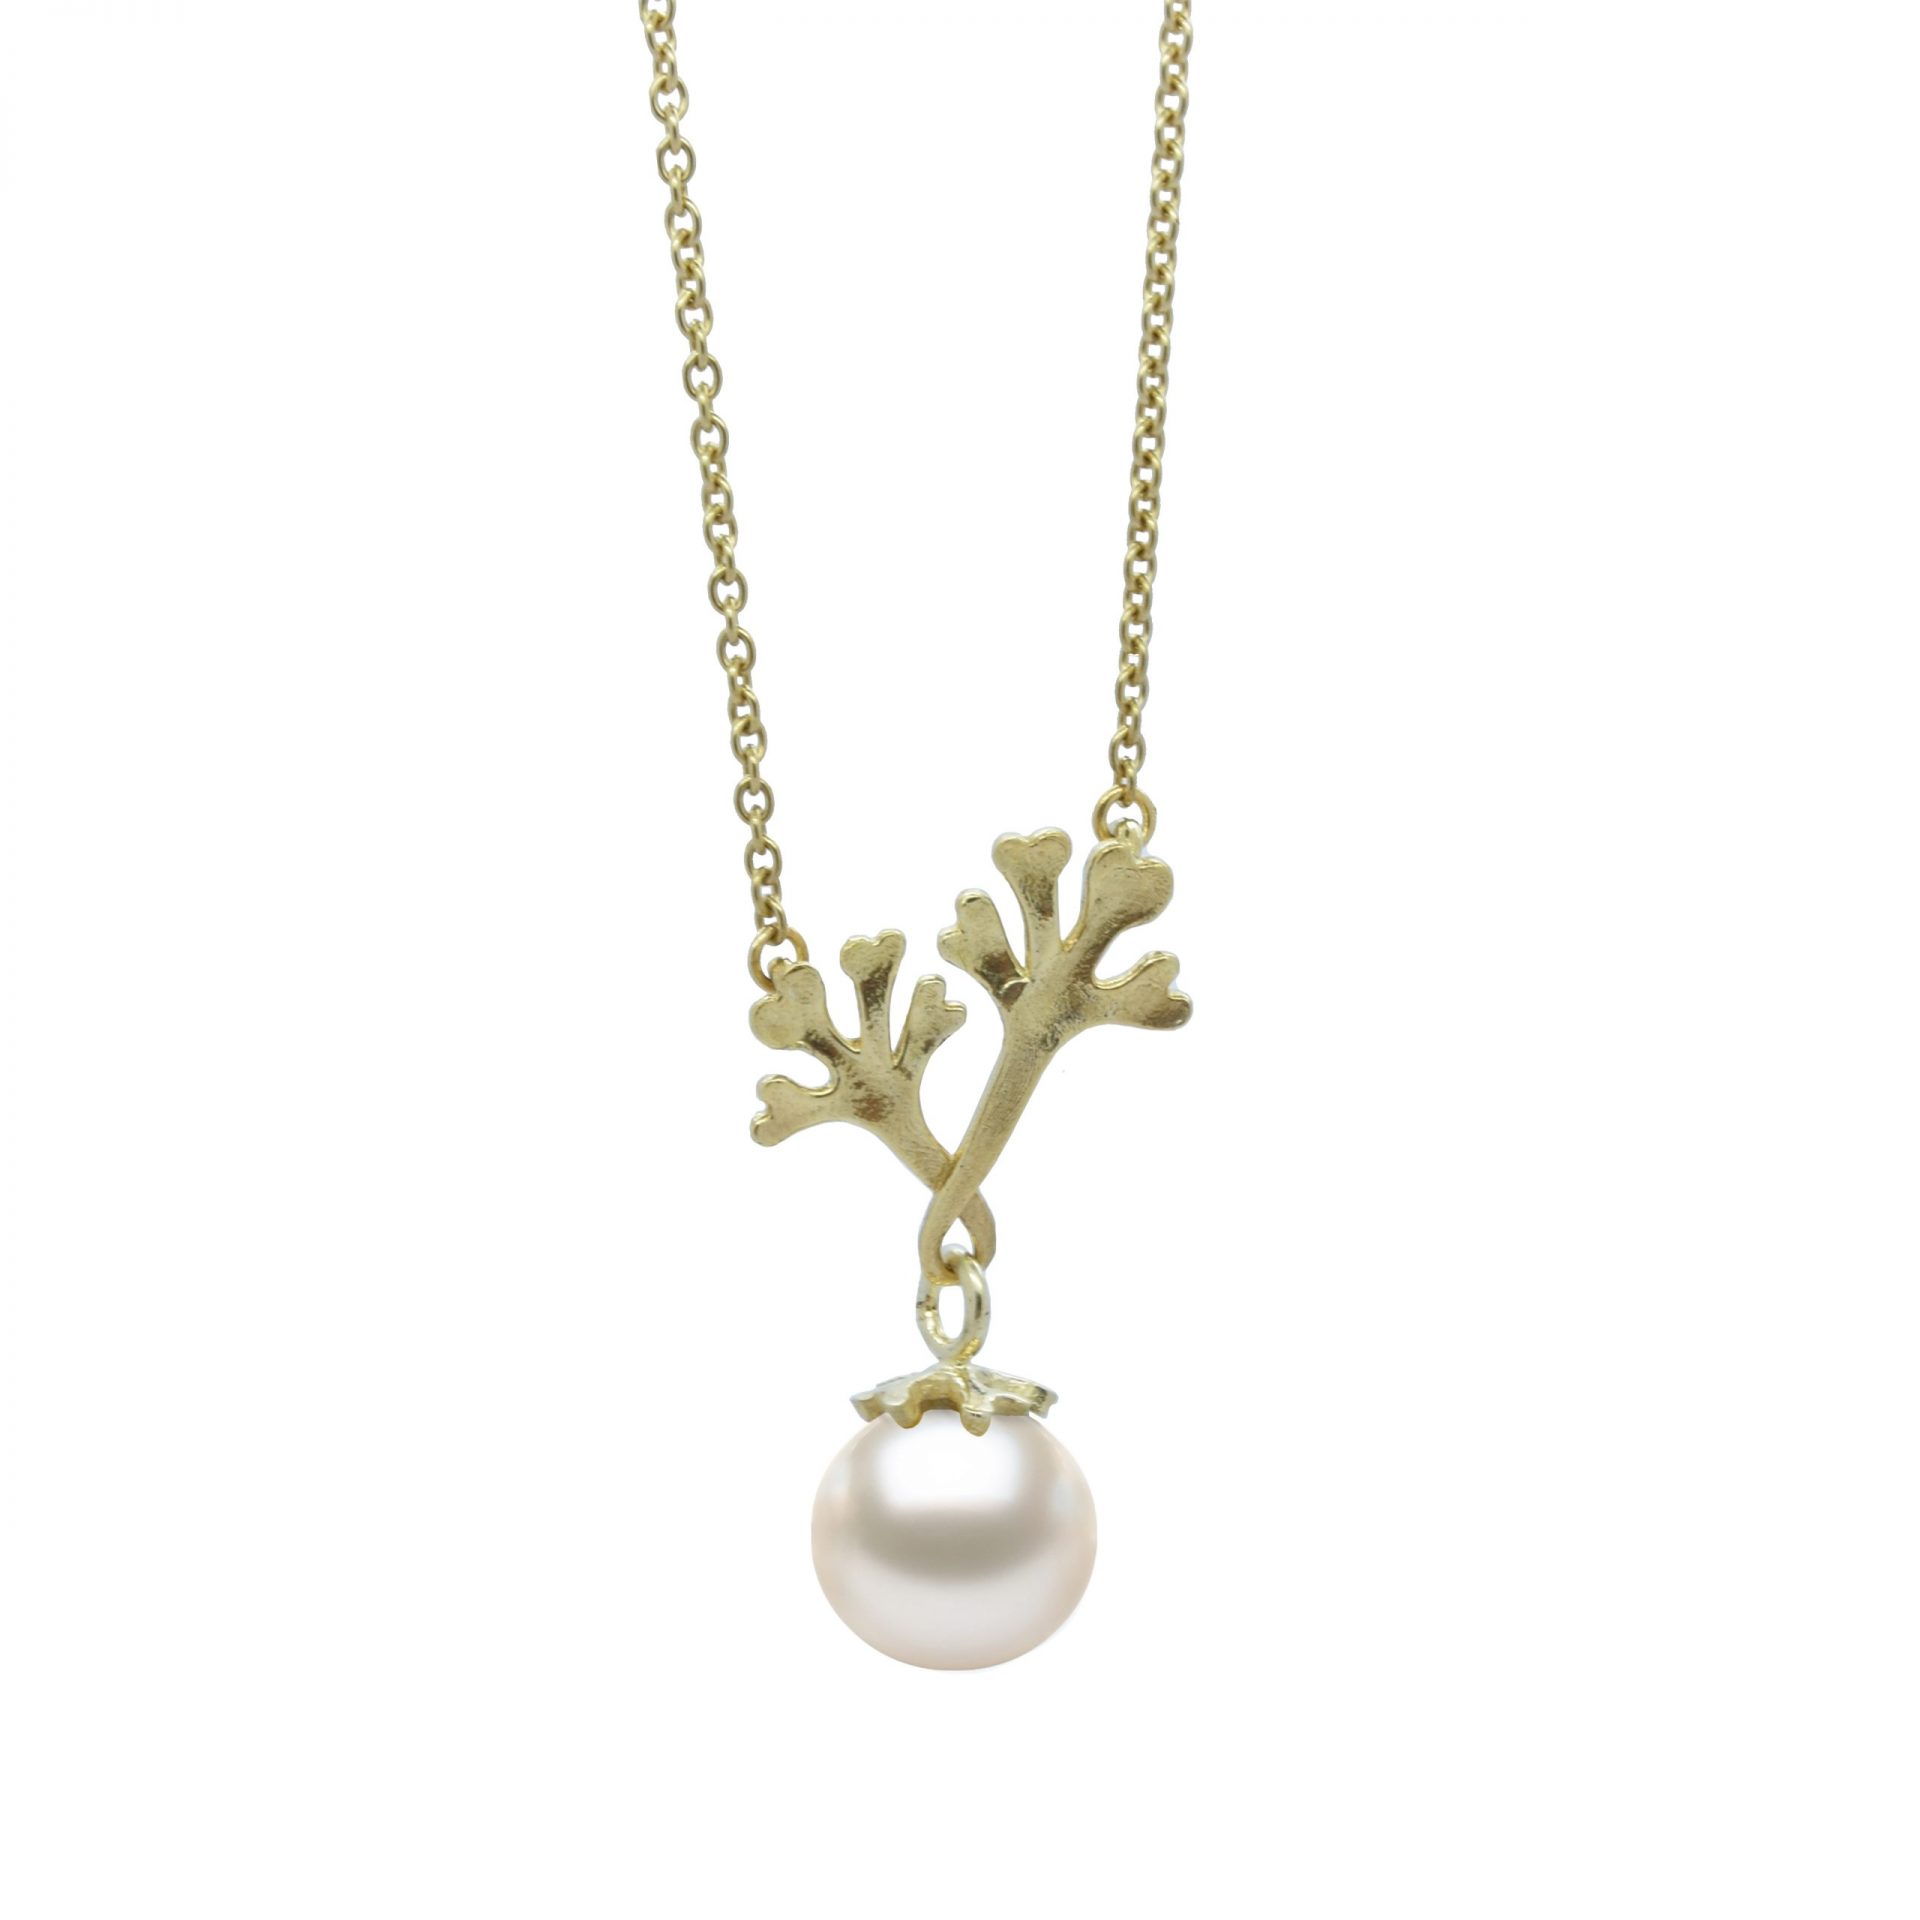 Chondrus Seaweed Pendant with South Sea Pearl by Jewellery designer Serena Fox